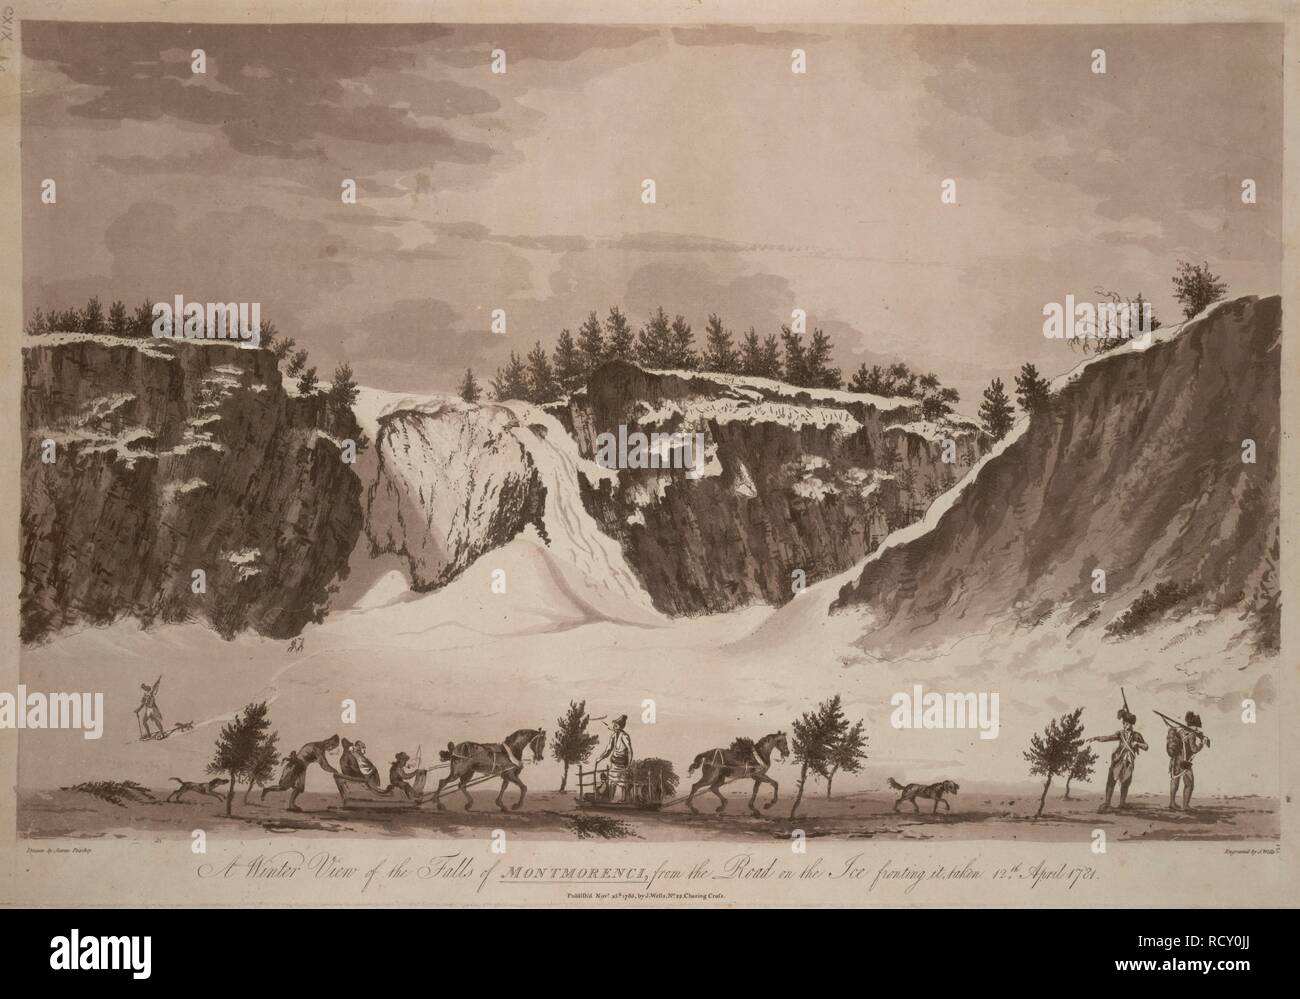 Soldiers, horses, dogs and sleds in the foreground; trees nearby; the frozen Montmorency Falls in the background. A Winter View of the Falls of MONTMORENCI, from the Road on the Ice fronting it, taken 12th April 1781. [London] : Publish'd Novr 25th 1785, by J. Wells, No22 Charing Corss., [November 25 1785]. Aquatint and etching. Source: Maps K.Top.119.44.b. Language: English. Author: Peachey, James. Stock Photo